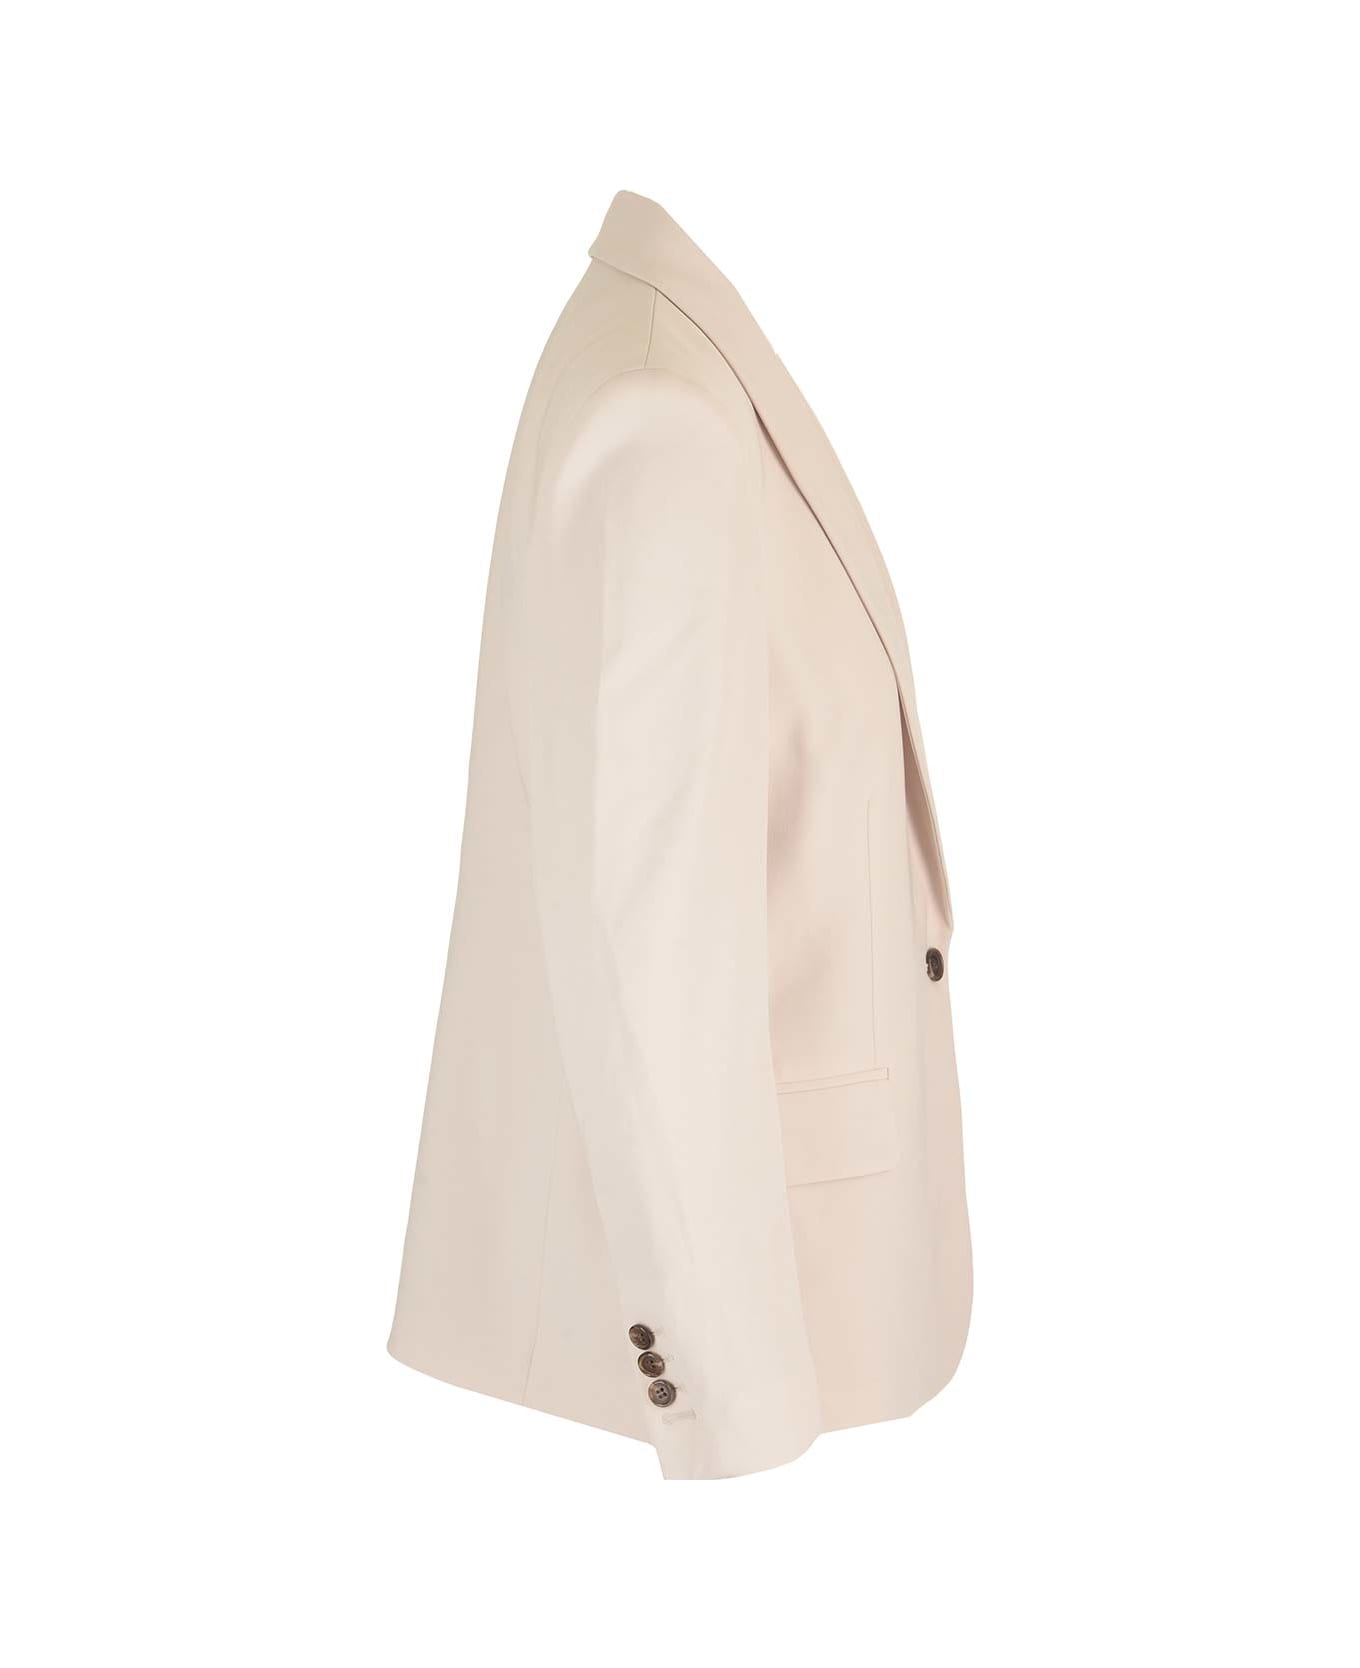 Theory Beige Single-breasted Jacket - Pumice